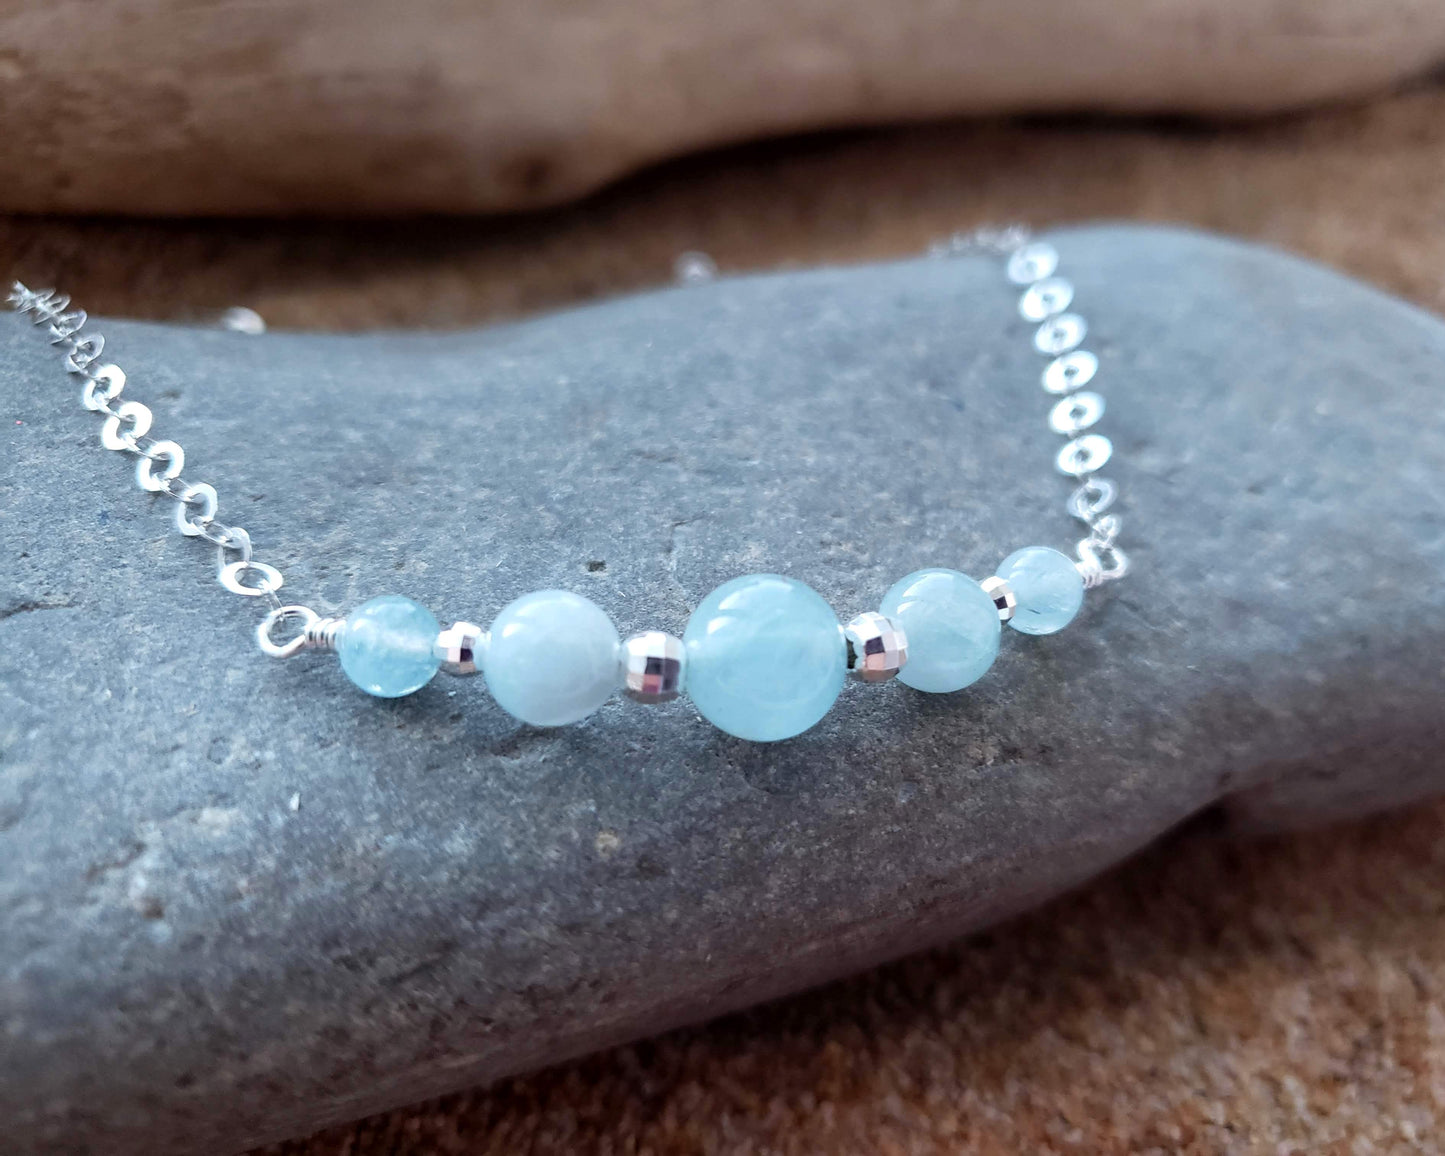 Aquamarine Peaceful Journey Necklace with five Aquamarine stones Sterling Silver beads and sparkly chain.